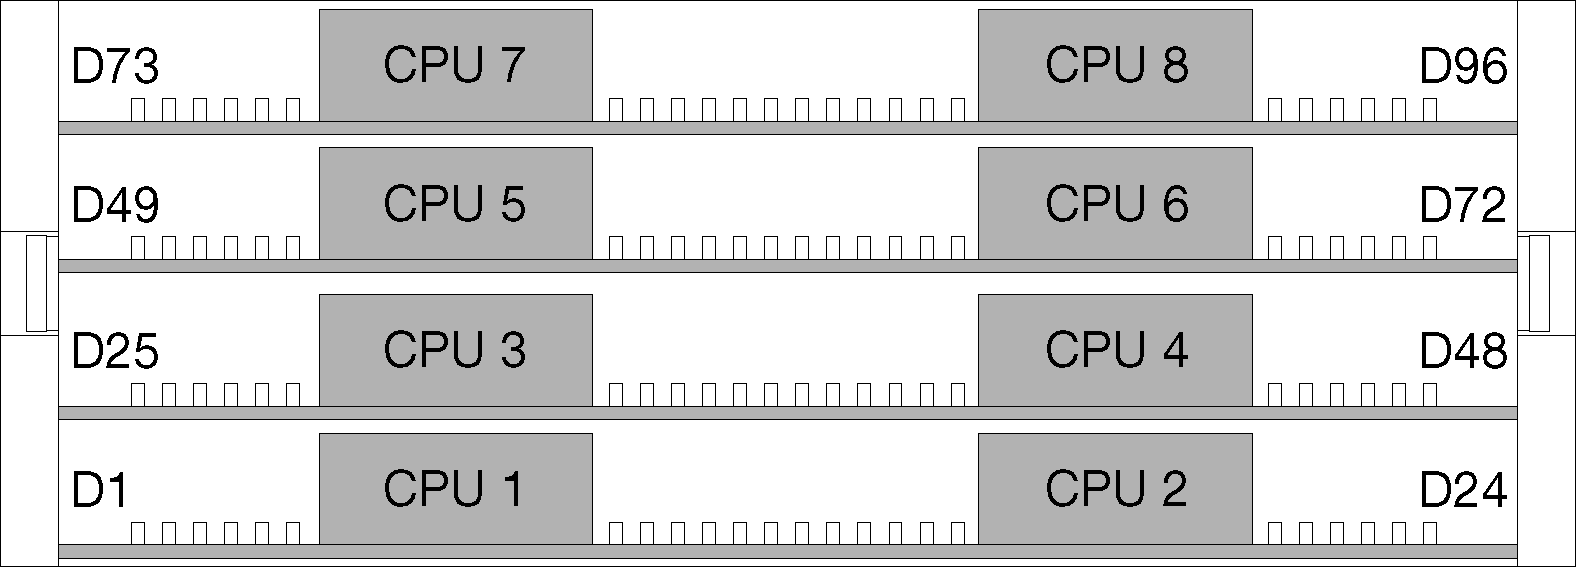 CPU and DIMM layout for multiple-processor systems